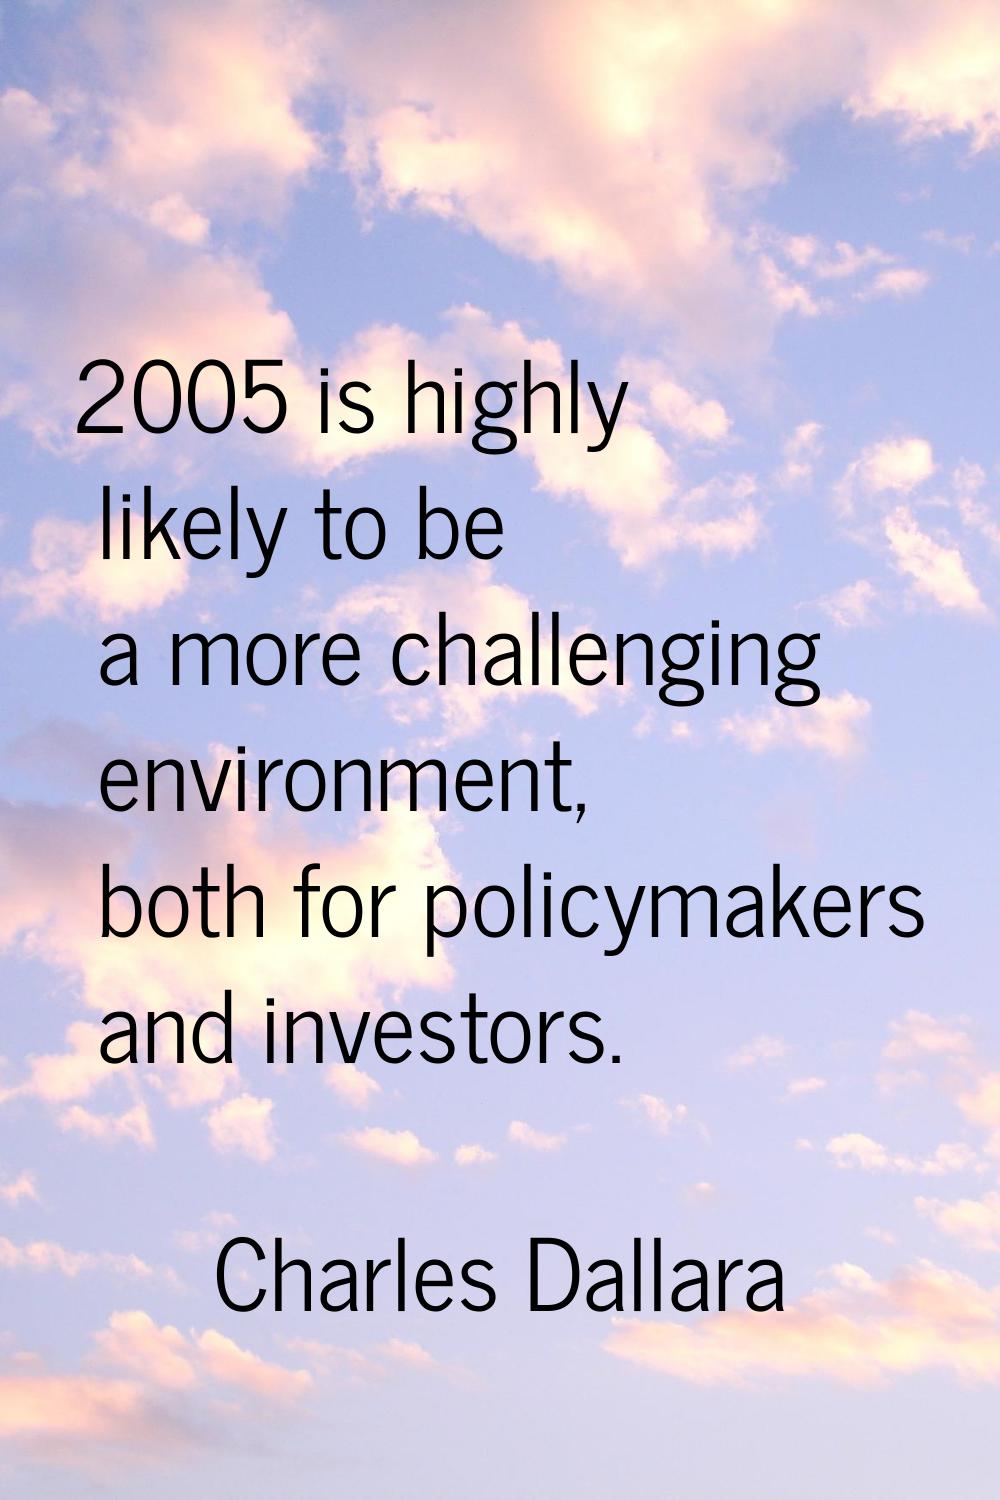 2005 is highly likely to be a more challenging environment, both for policymakers and investors.